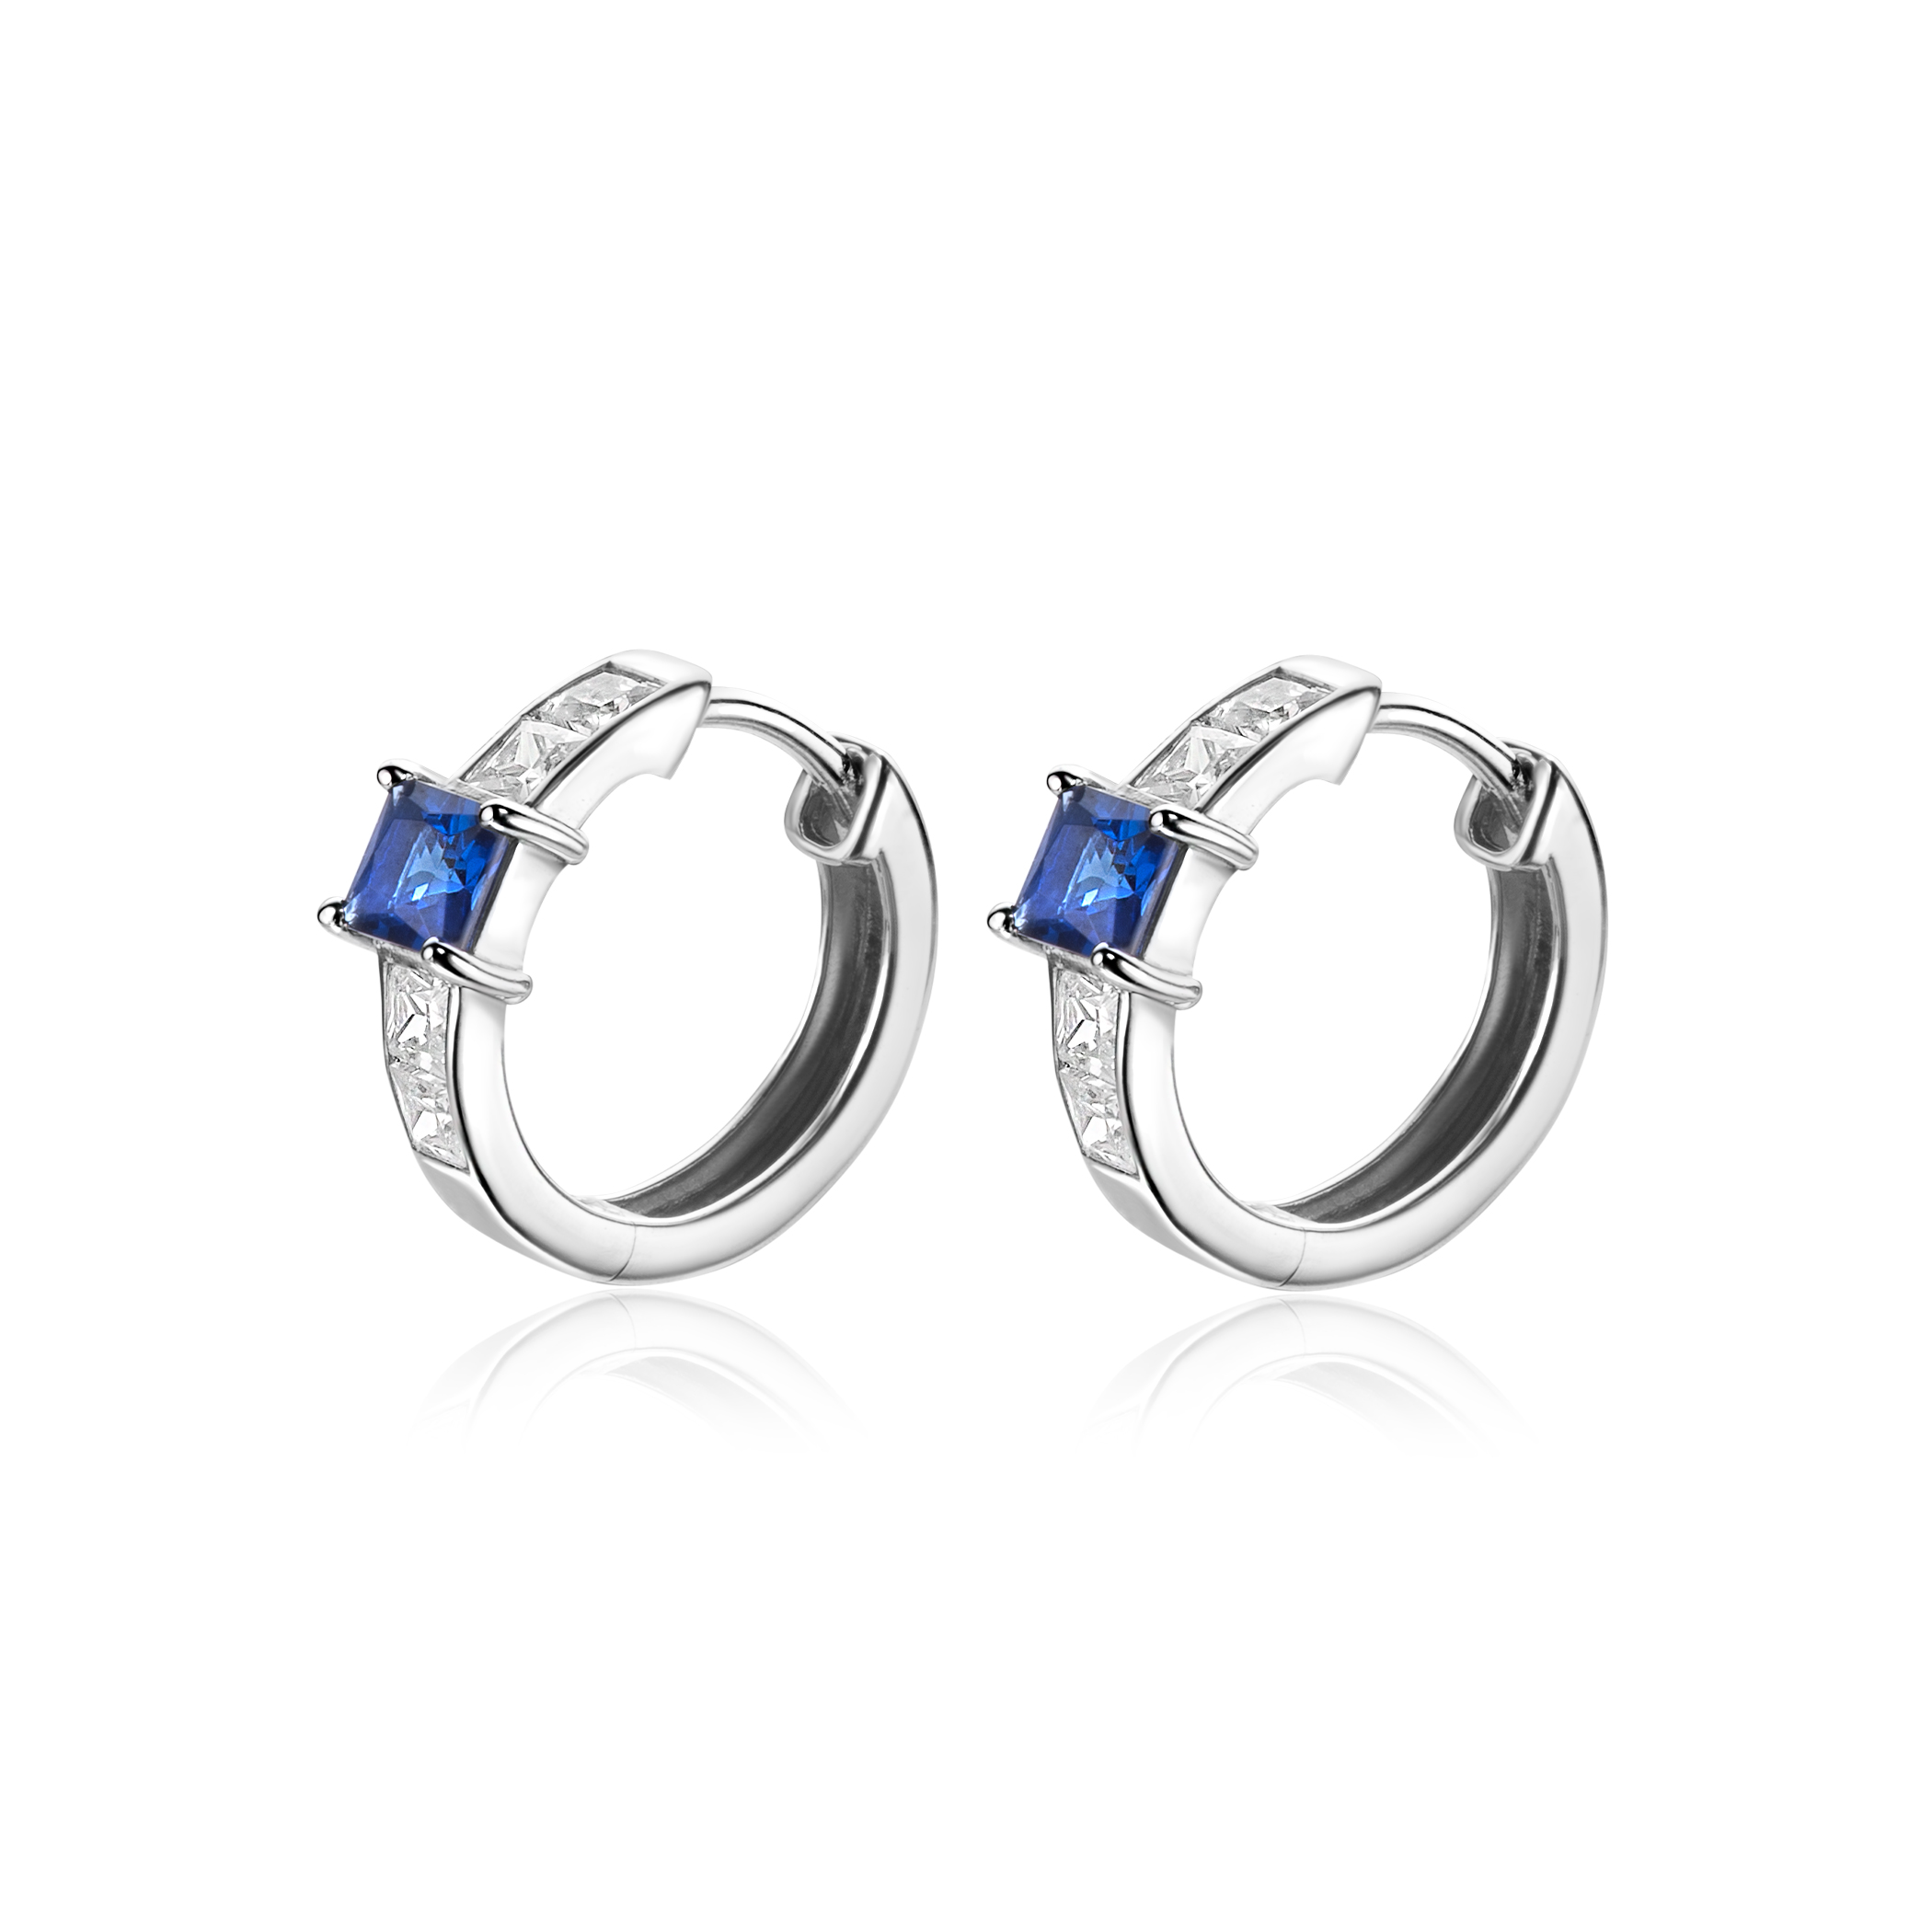 16mm ZINZI Sterling Silver Hoop Earrings Square Sapphire Blue Color Stone and White Zirconias 16x3mm ZIO2453